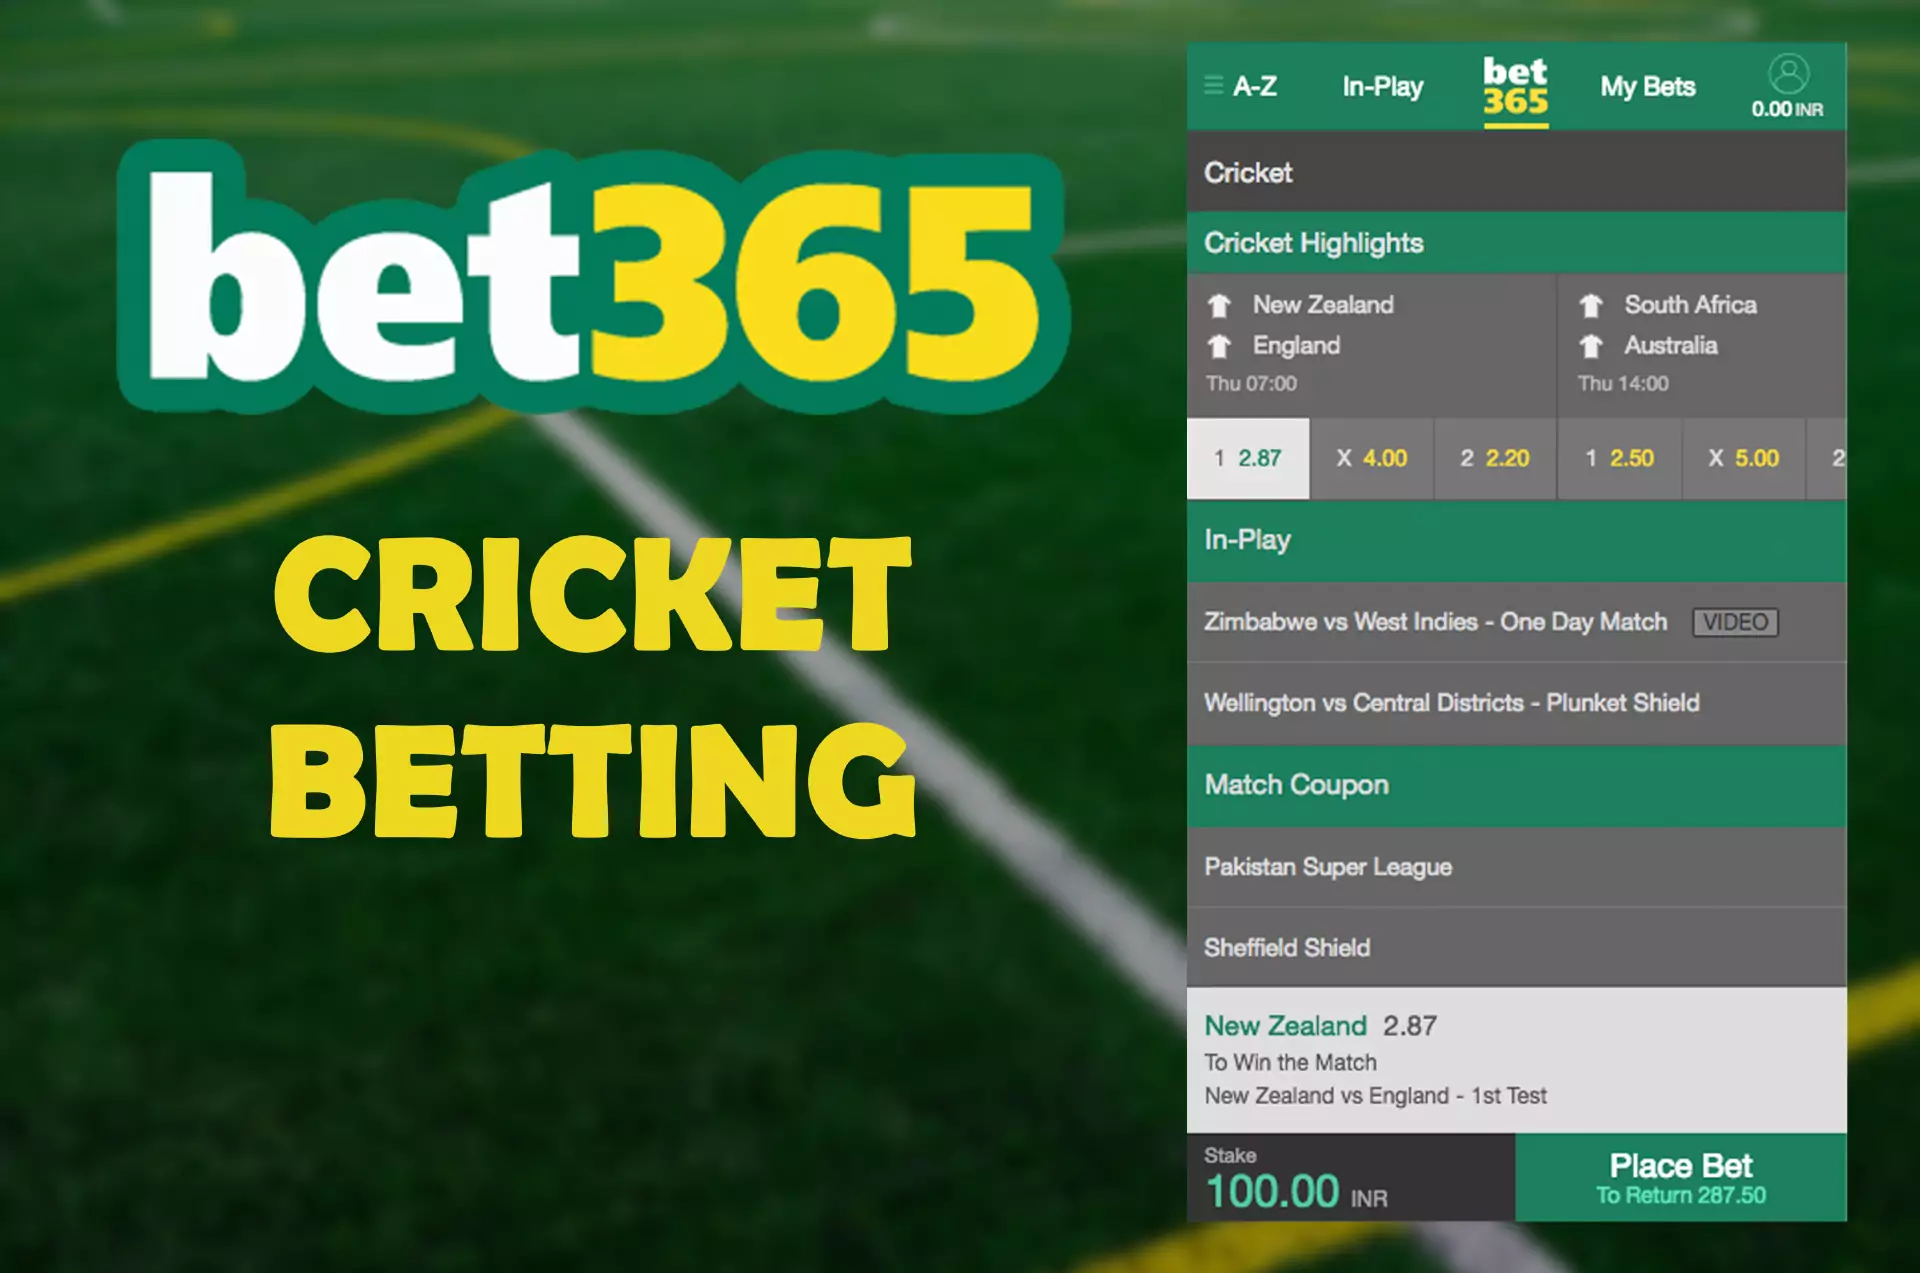 Cricket fans can place bets for their favorite teams.